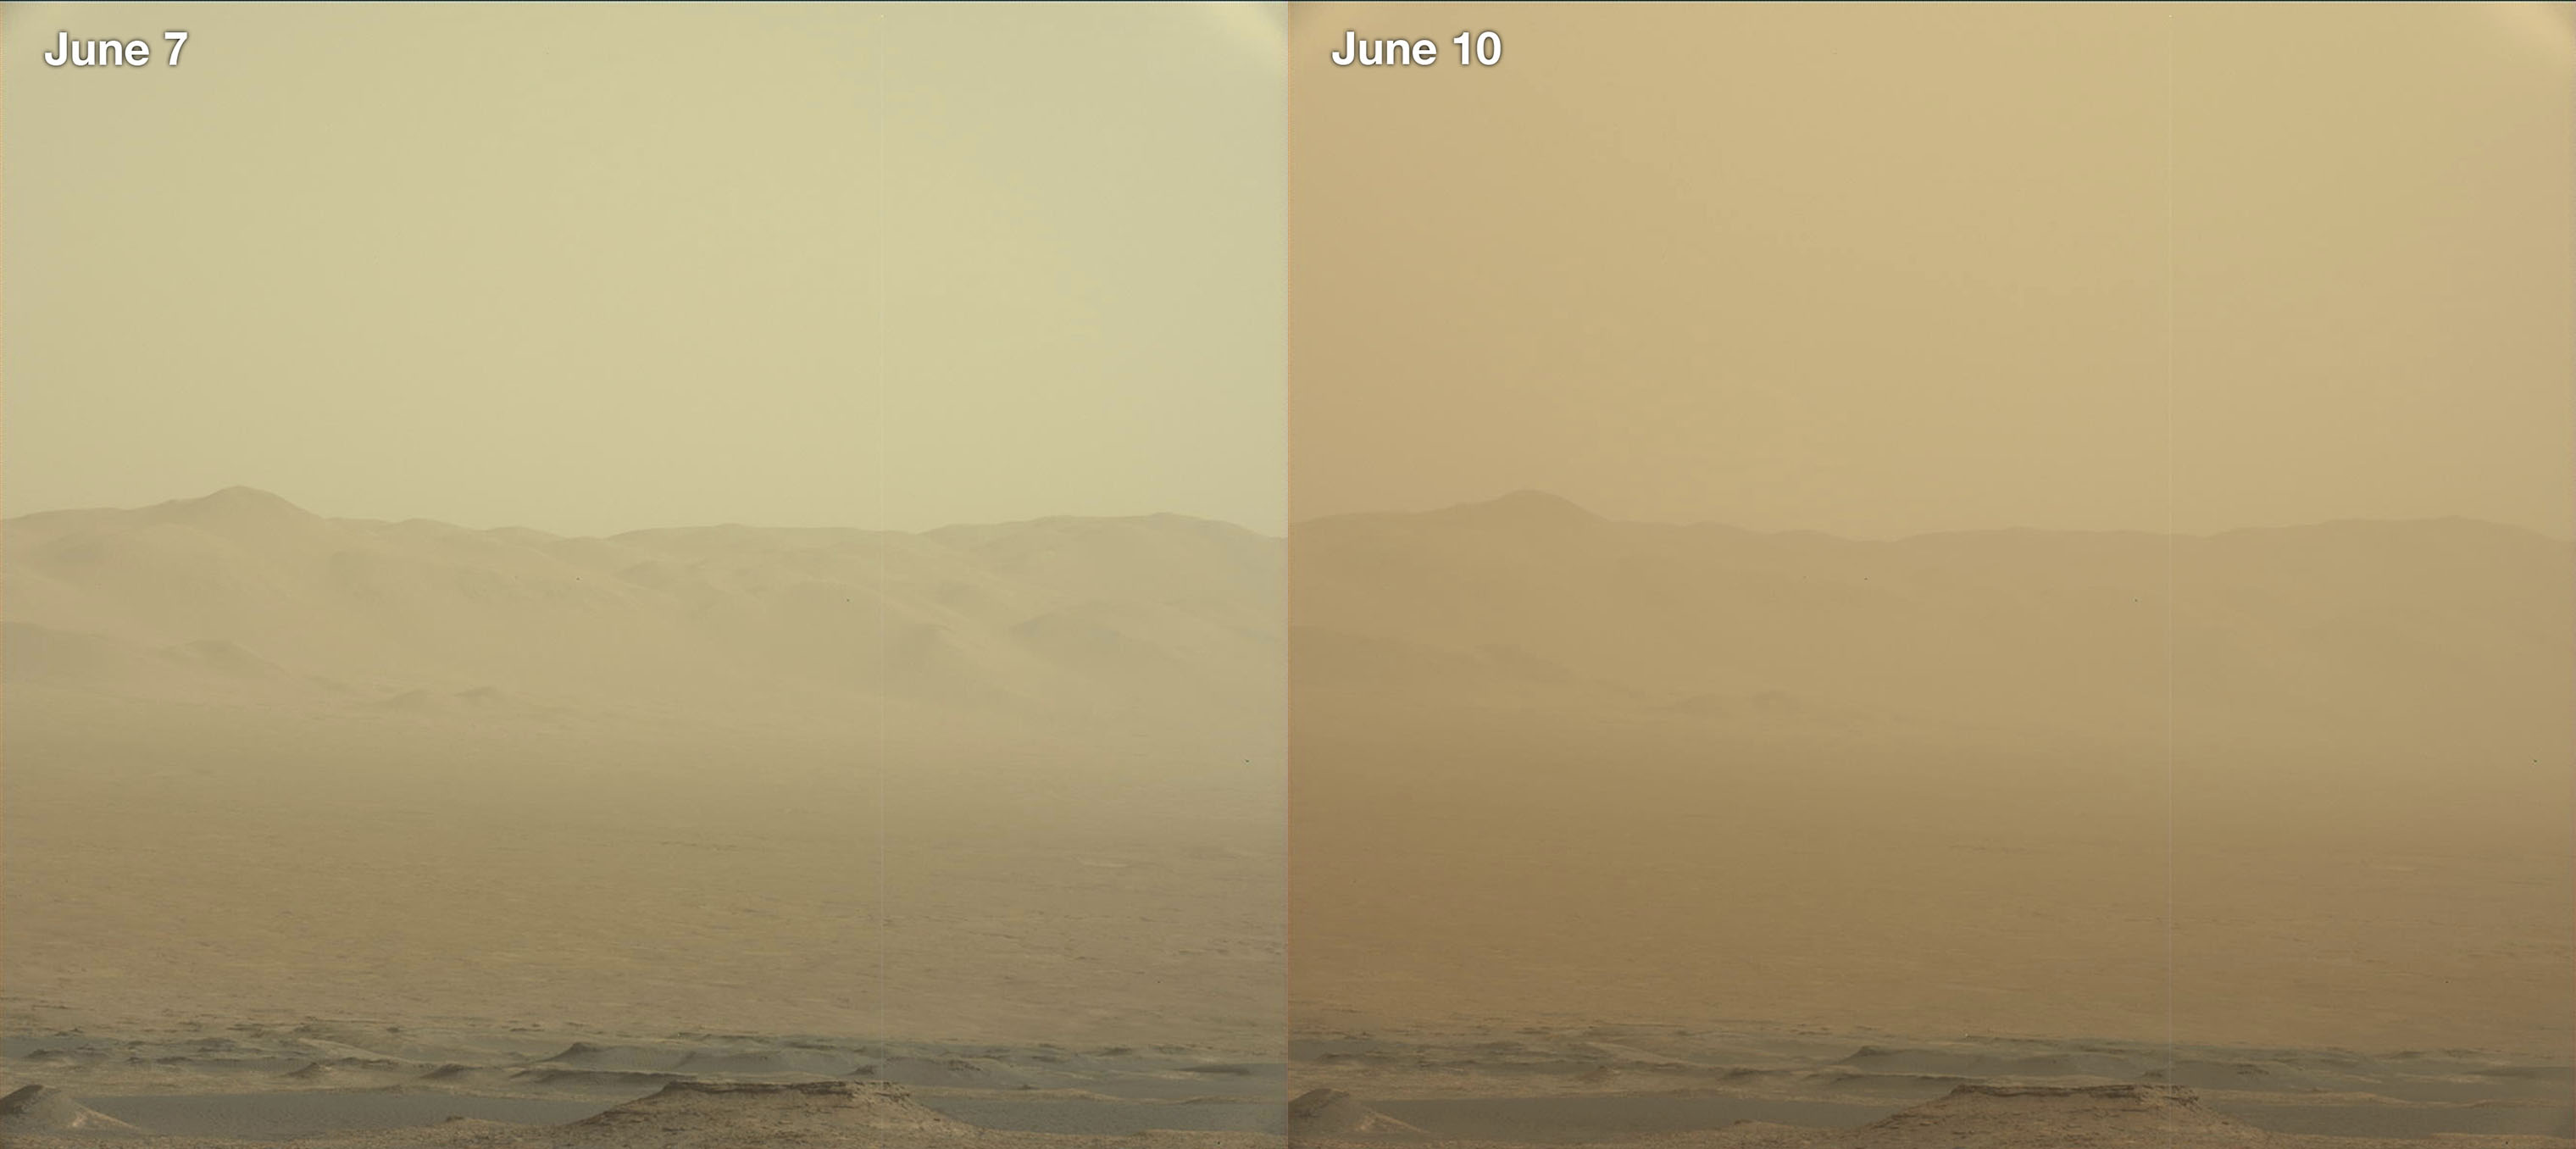 This combination of images made by NASA's Curiosity rover shows the rim of the Gale Crater on June 7 and 10, 2018, during a major dust storm. The Opportunity rover, which is inside the crater, fell silent as the storm blotted out the sun. On June 12, 2018, flight controllers tried to contact Opportunity, but the rover did not respond. (NASA/JPL-Caltech/MSSS via AP)